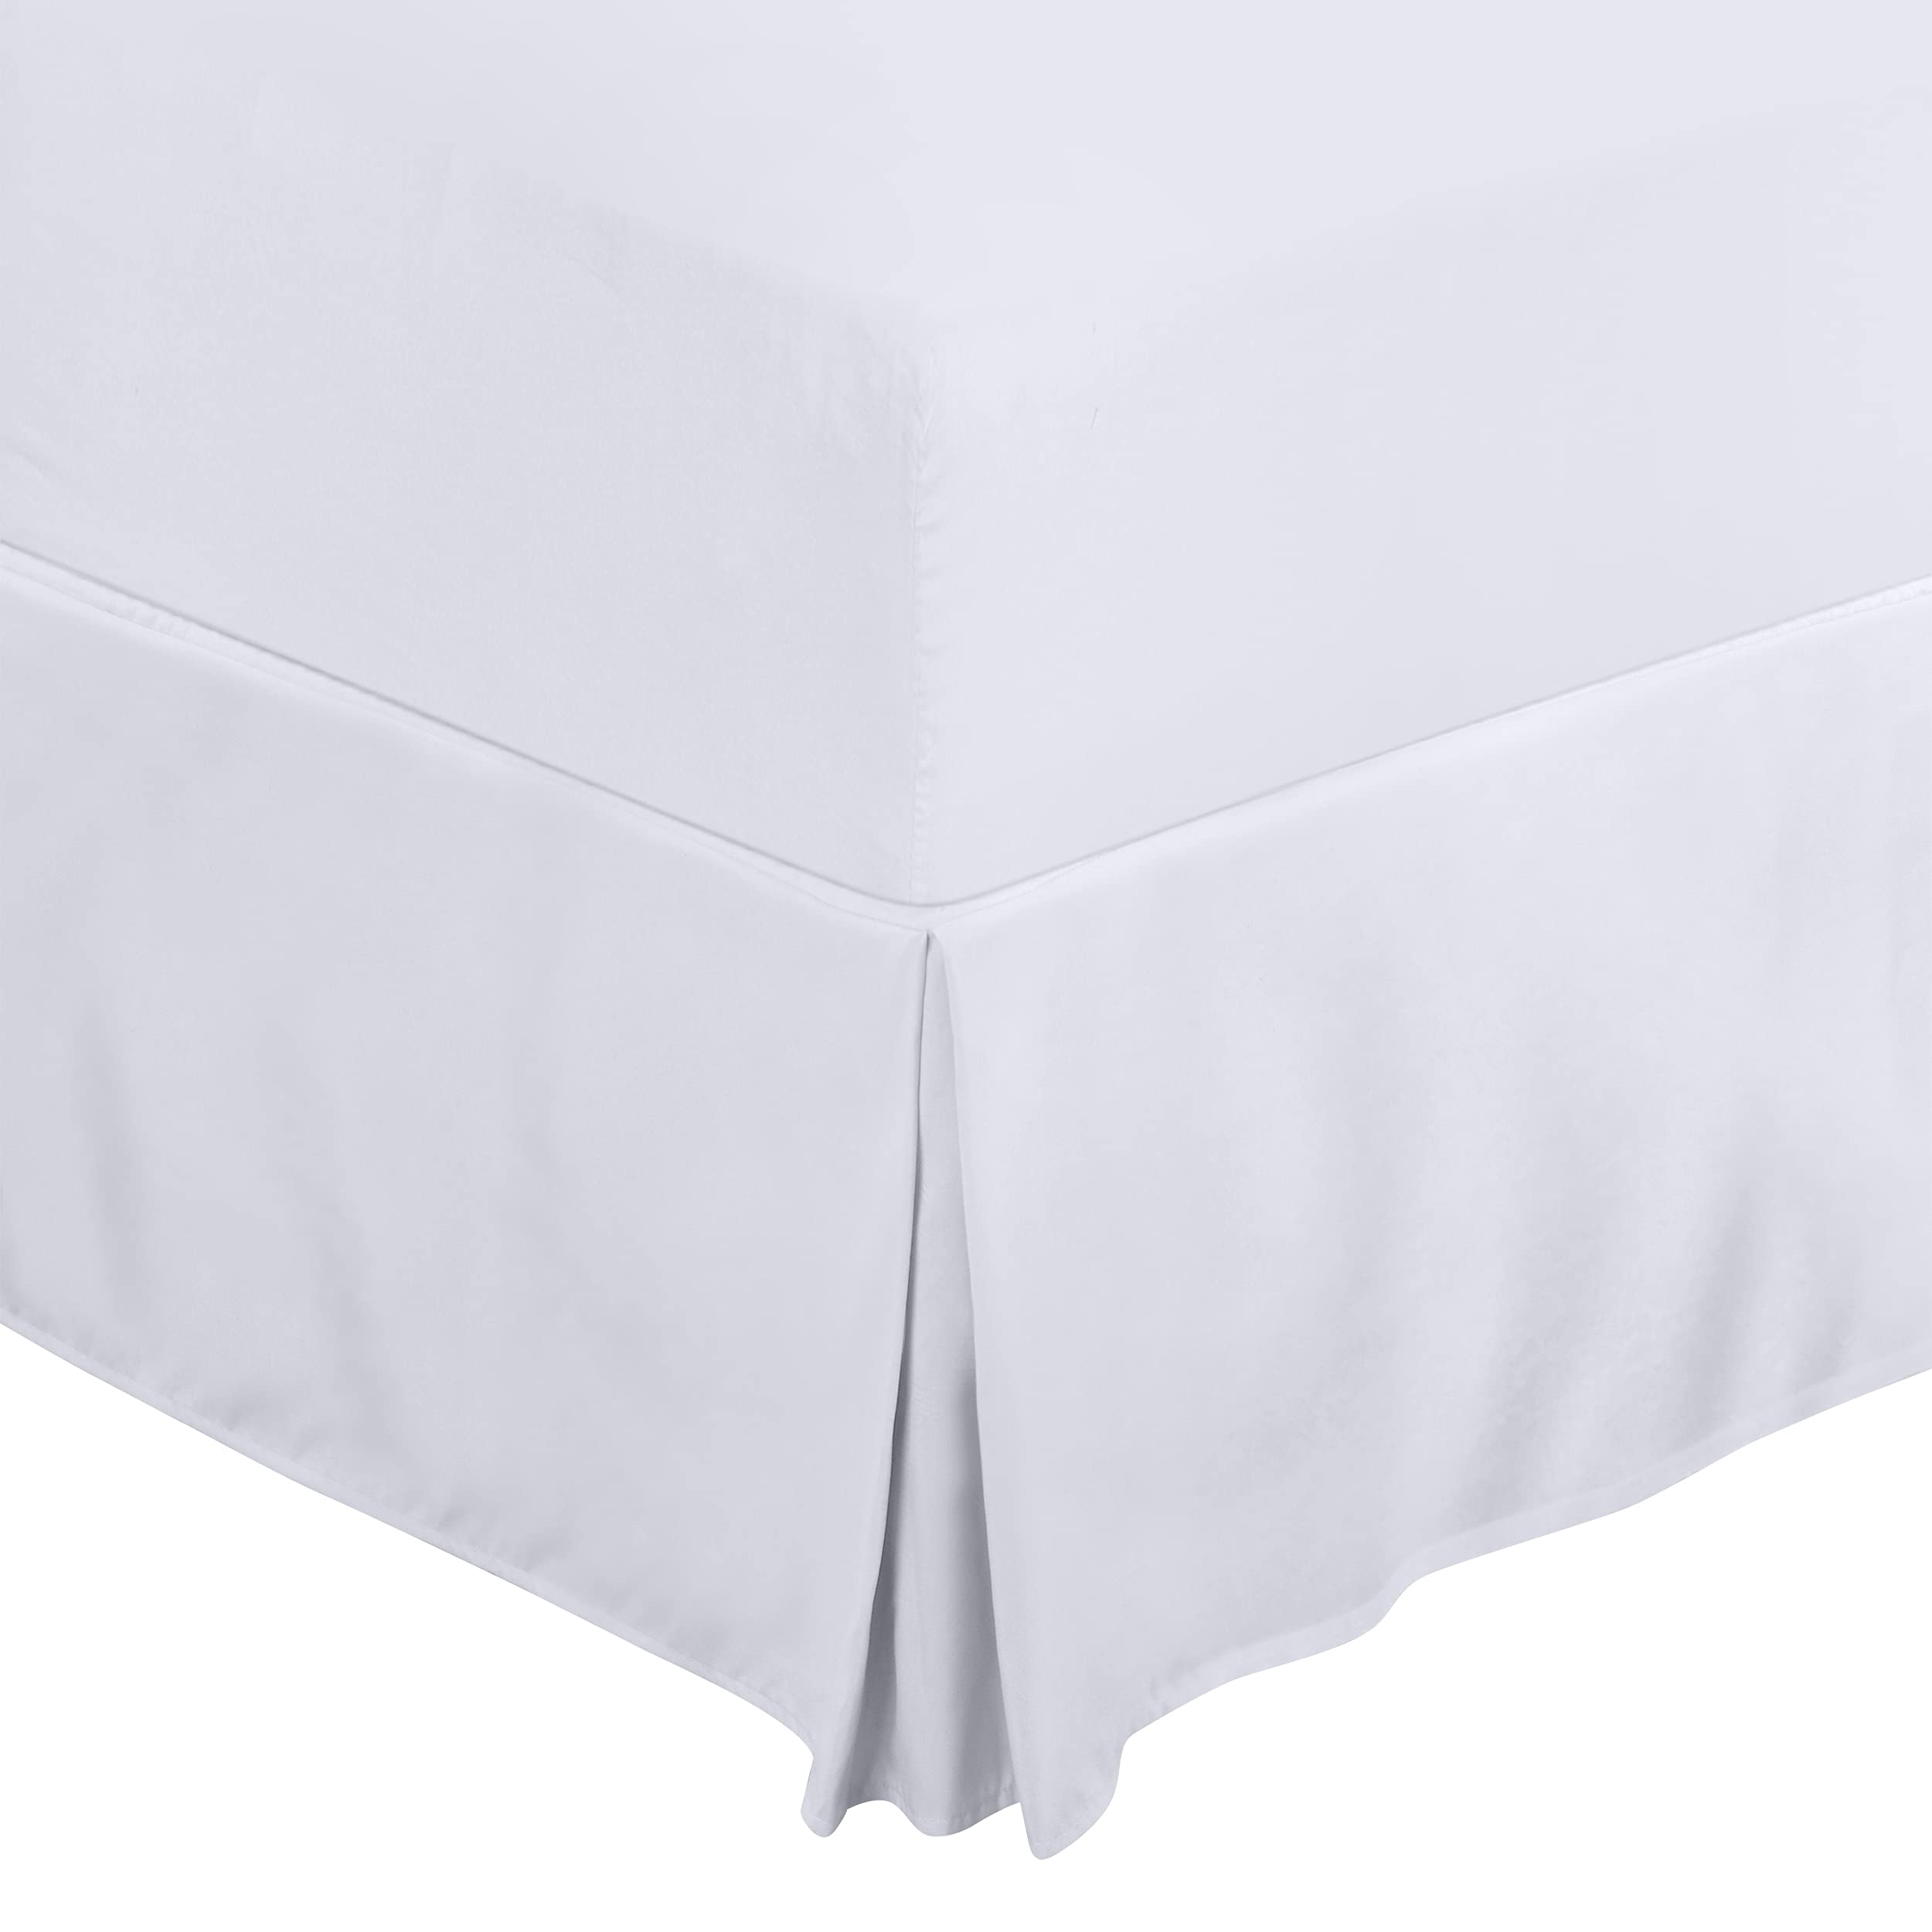 Book Cover Utopia Bedding Twin Bed Skirt - Soft Quadruple Pleated Ruffle - Easy Fit with 15 Inch Tailored Drop - Hotel Quality, Shrinkage and Fade Resistant (Twin, White) Twin White